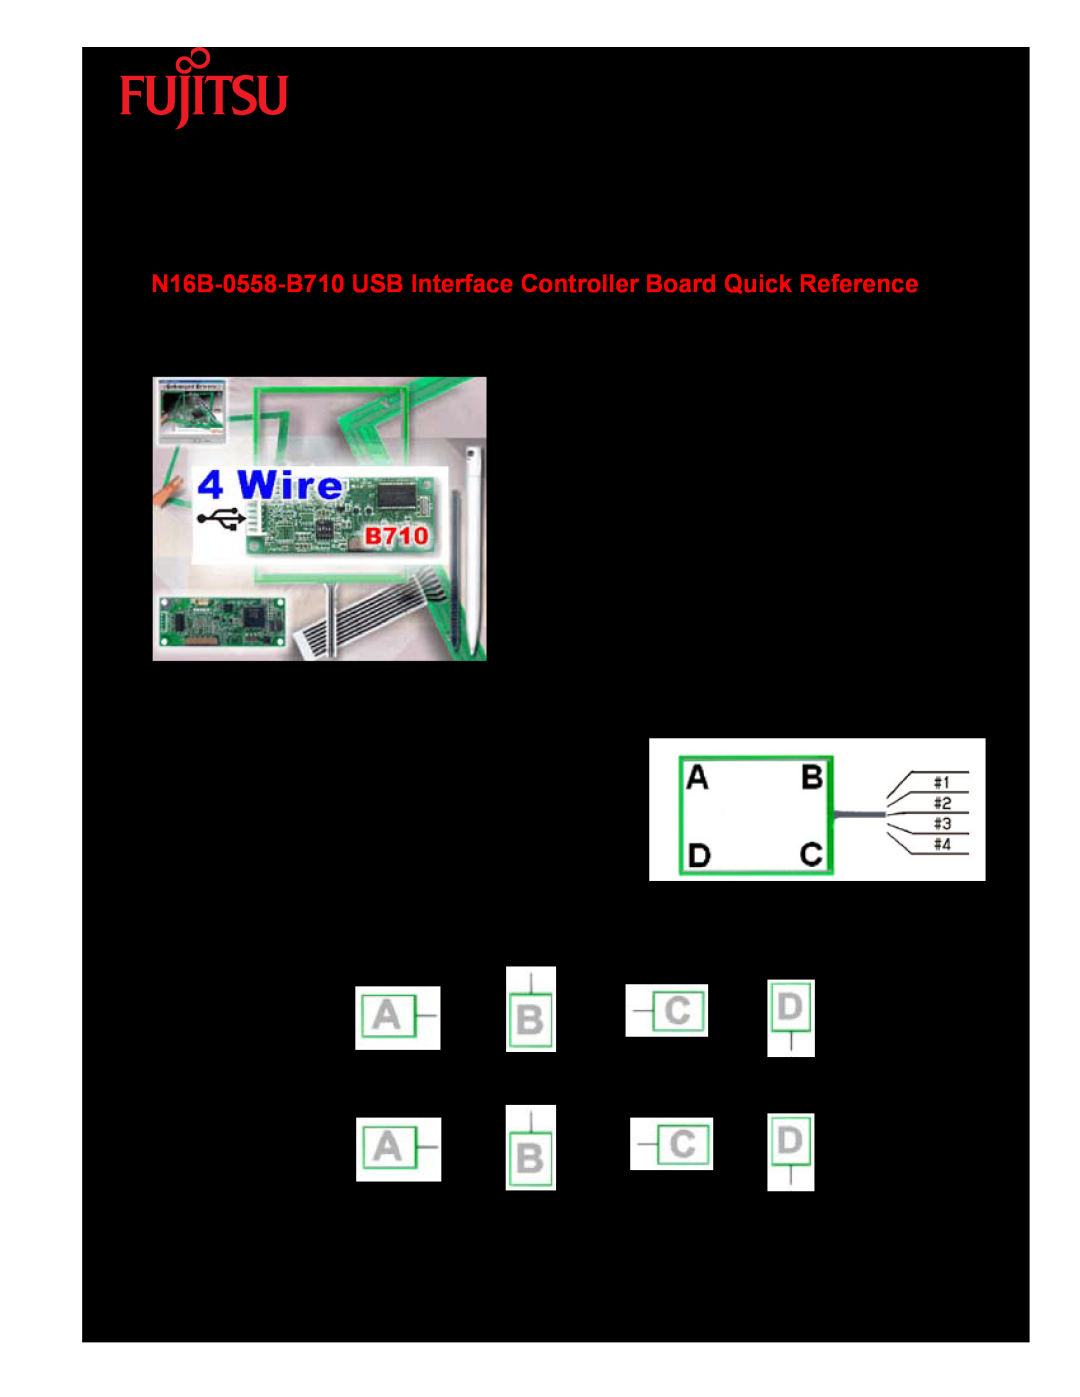 Fujitsu N6B-0558-B70 manual TOUCH PANEL CONTROL BOARD 4-WIRE USB, Wire Resistive Touch Panels 